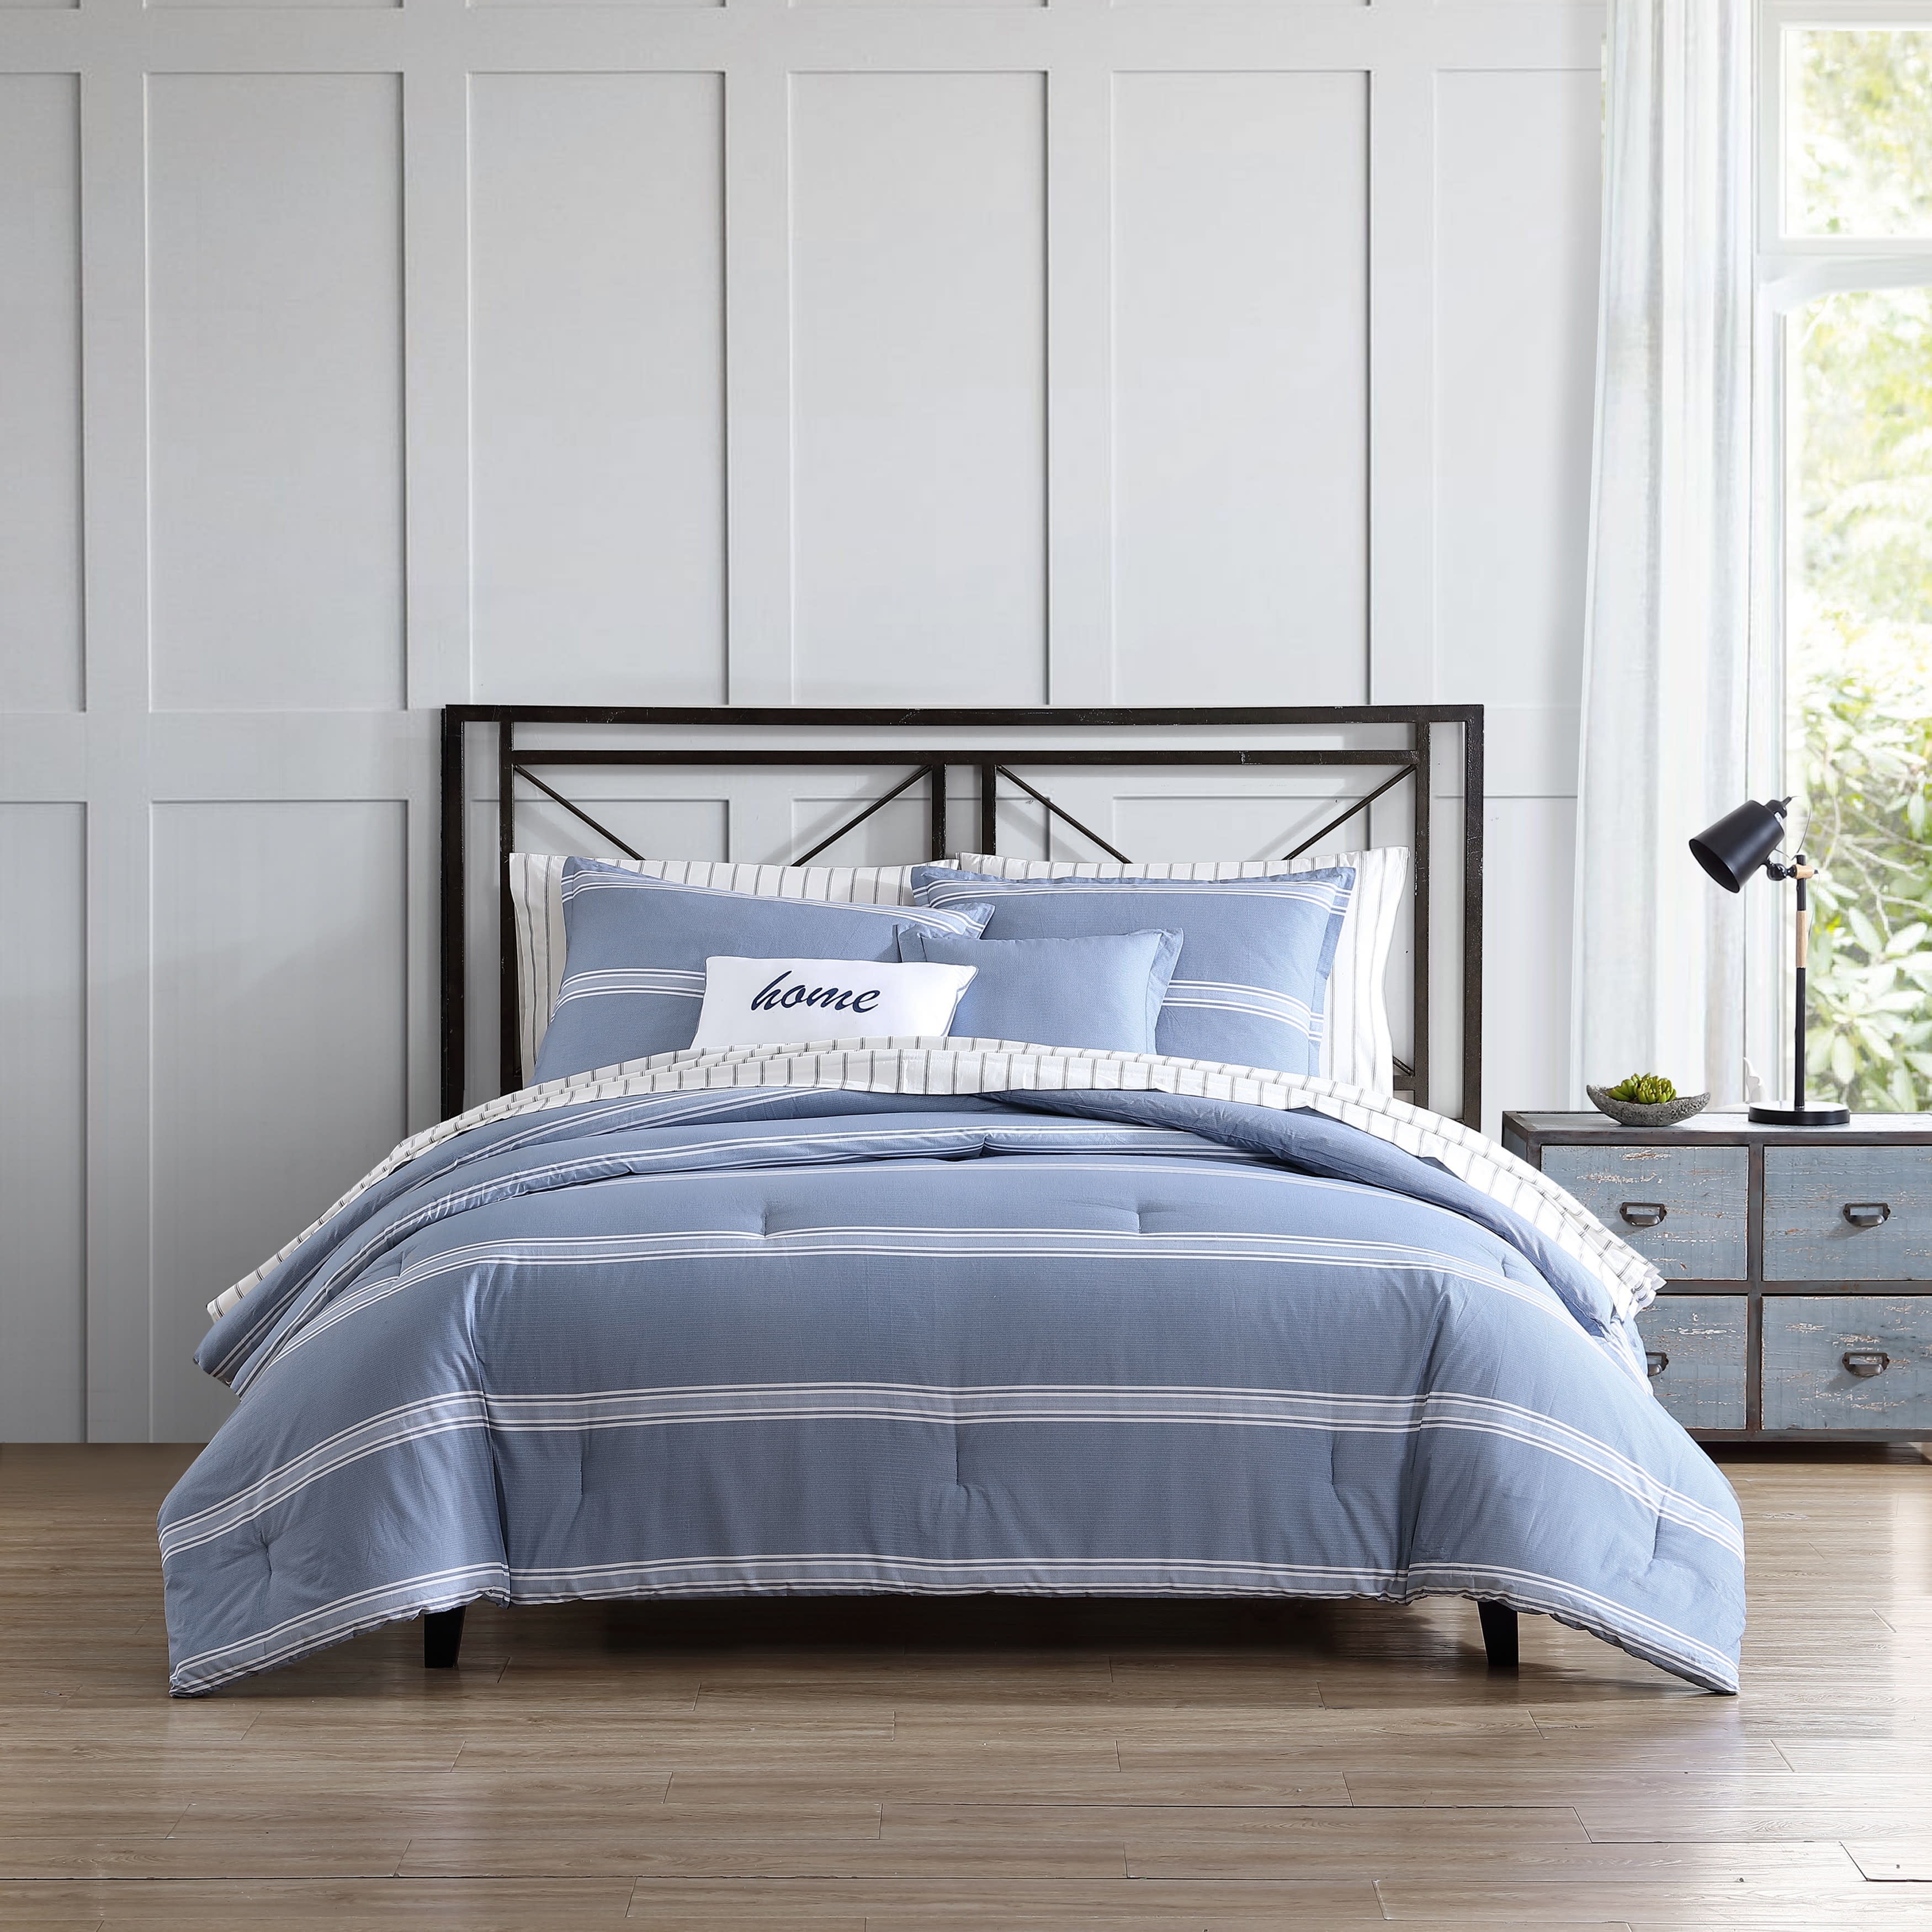 Stone Cottage Comforters and Sets - Bed Bath & Beyond